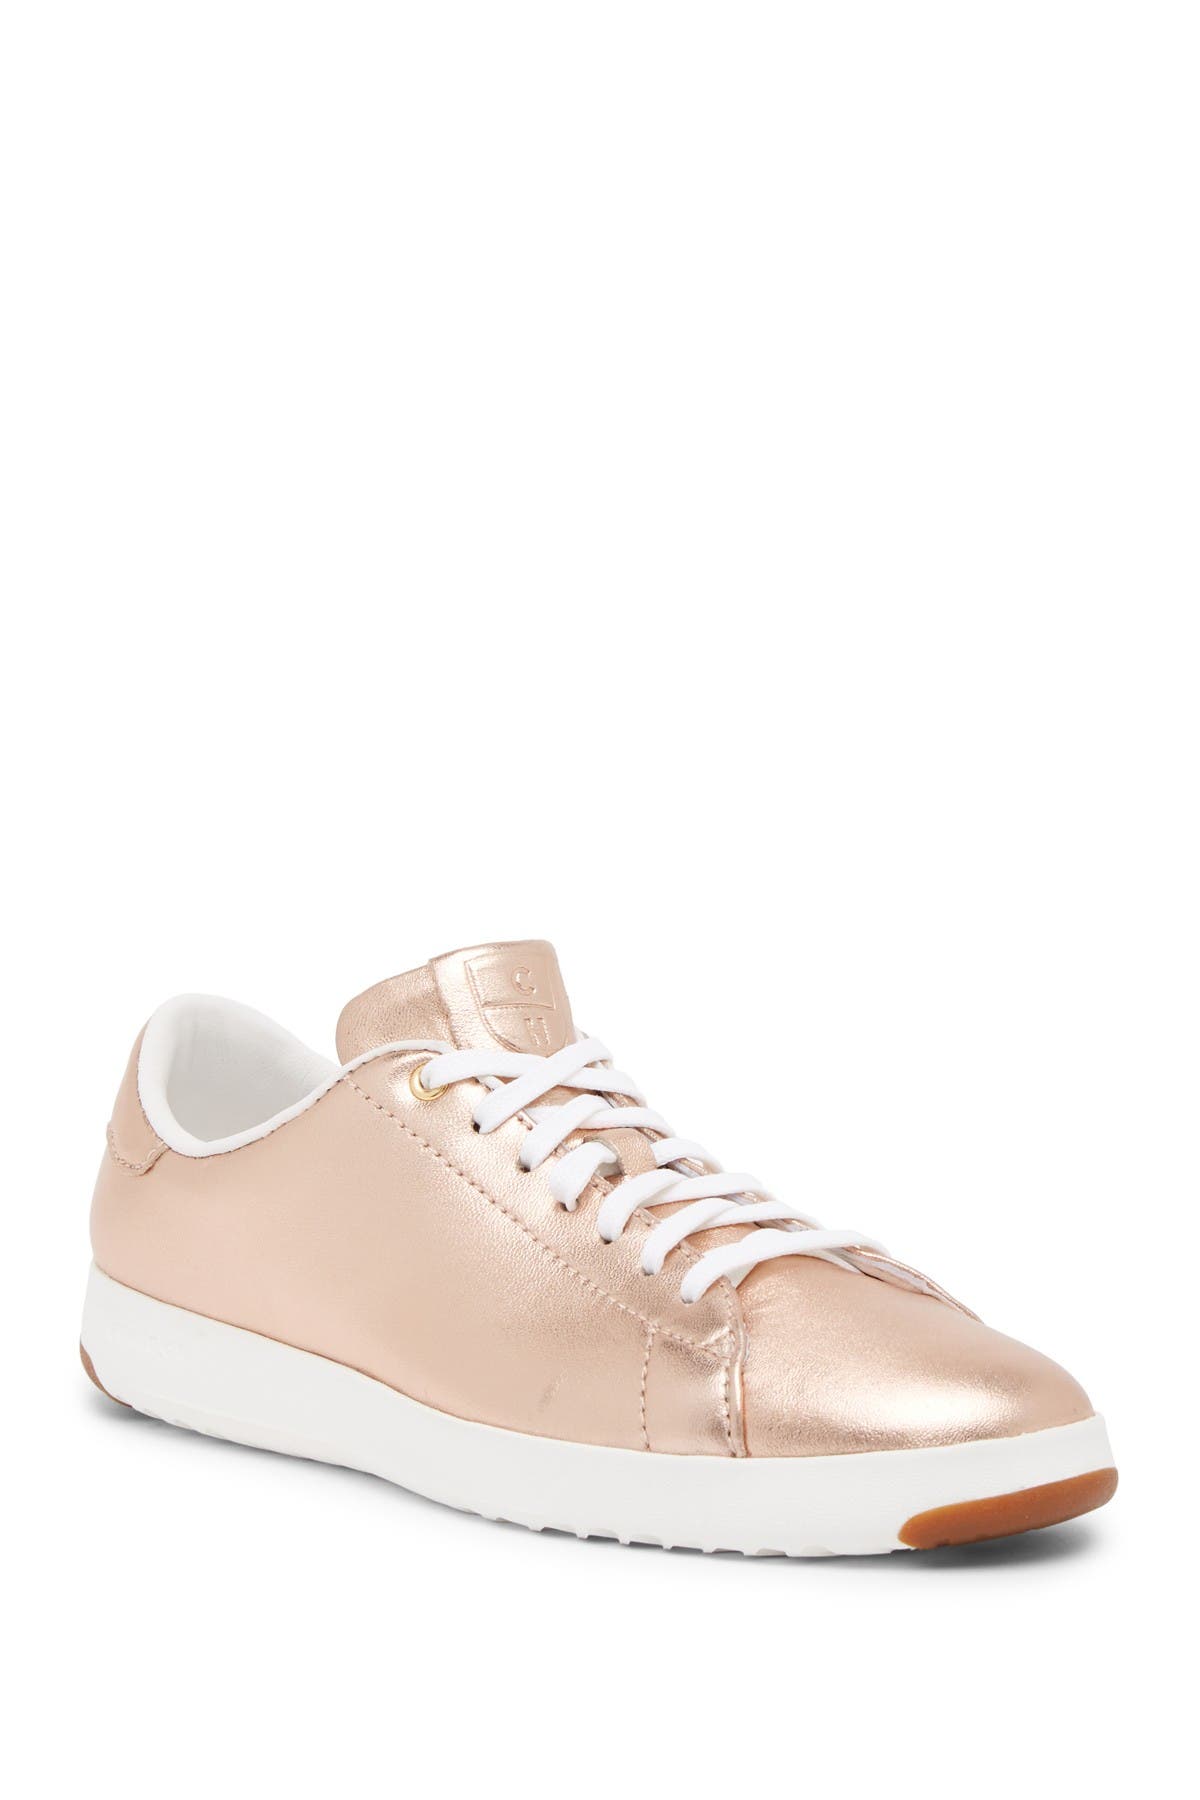 Cole Haan | GrandPro Tennis Leather 